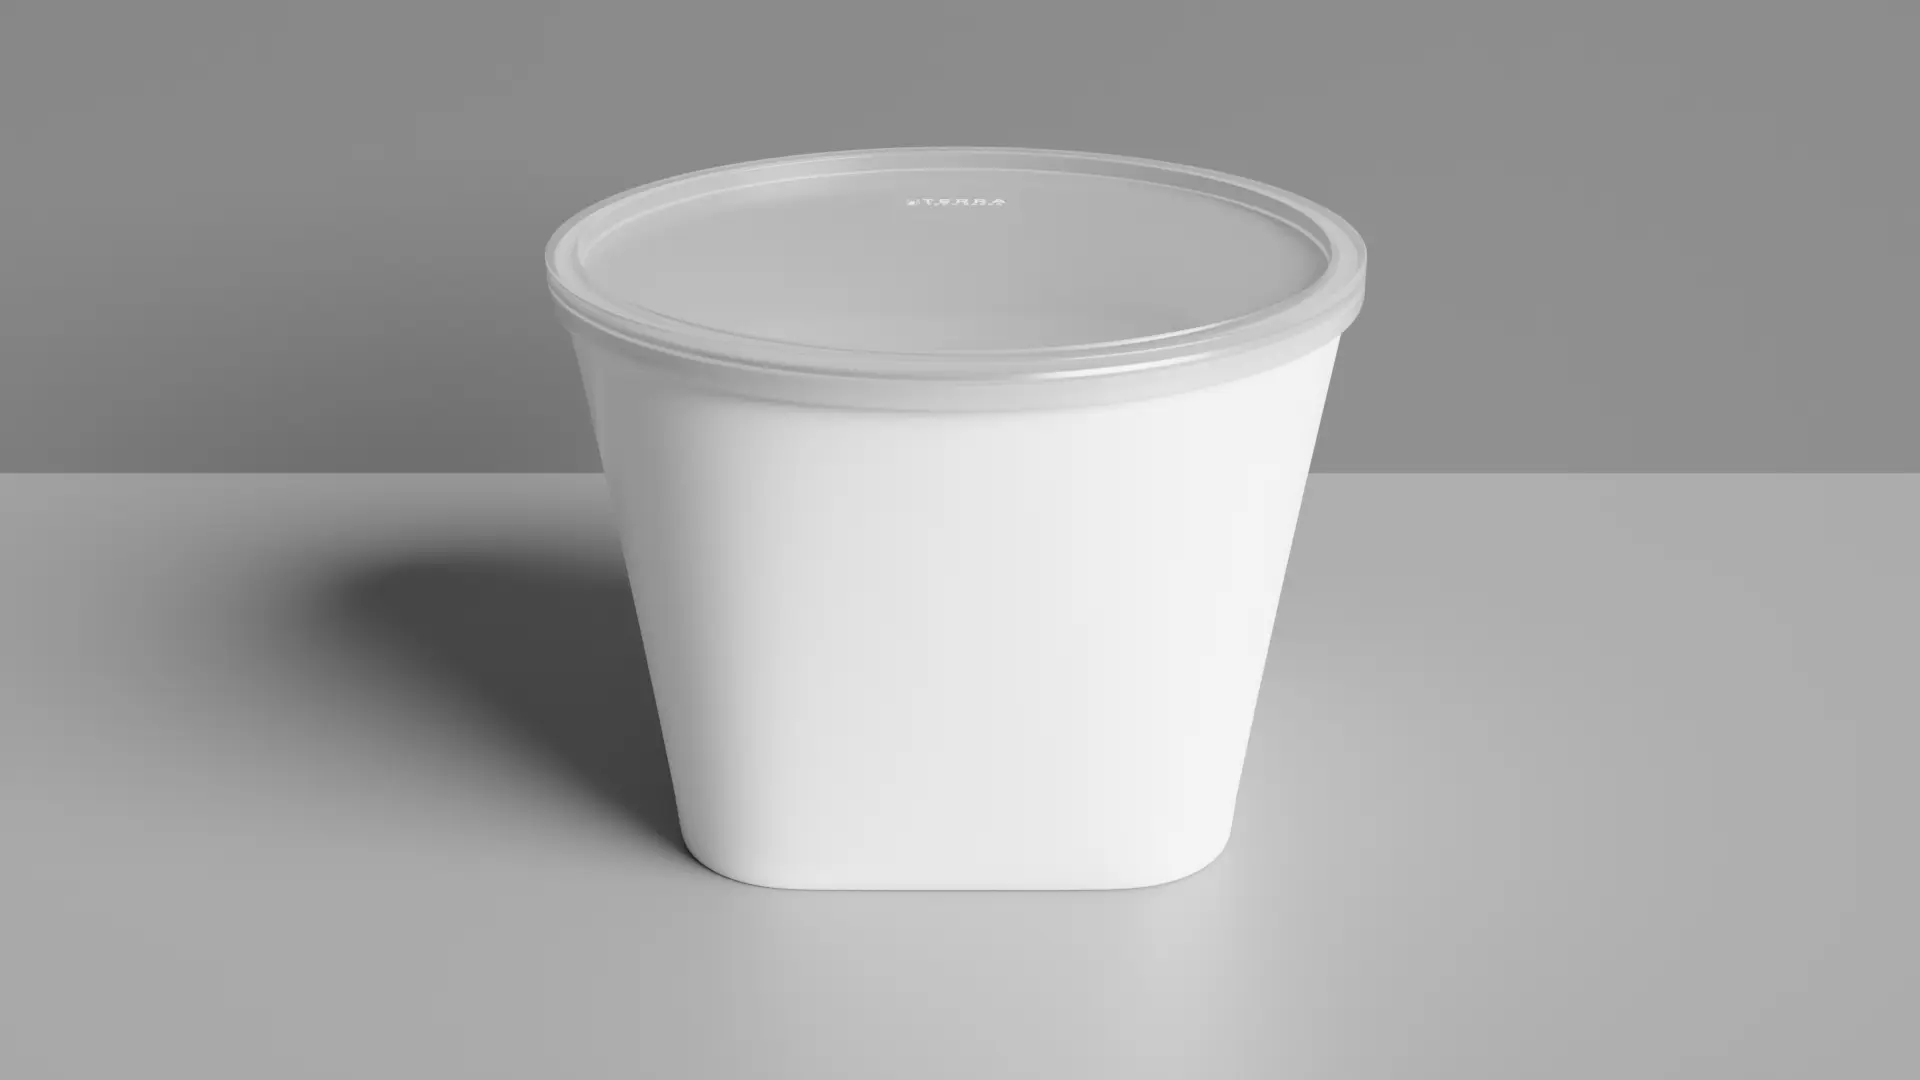 500ml Container